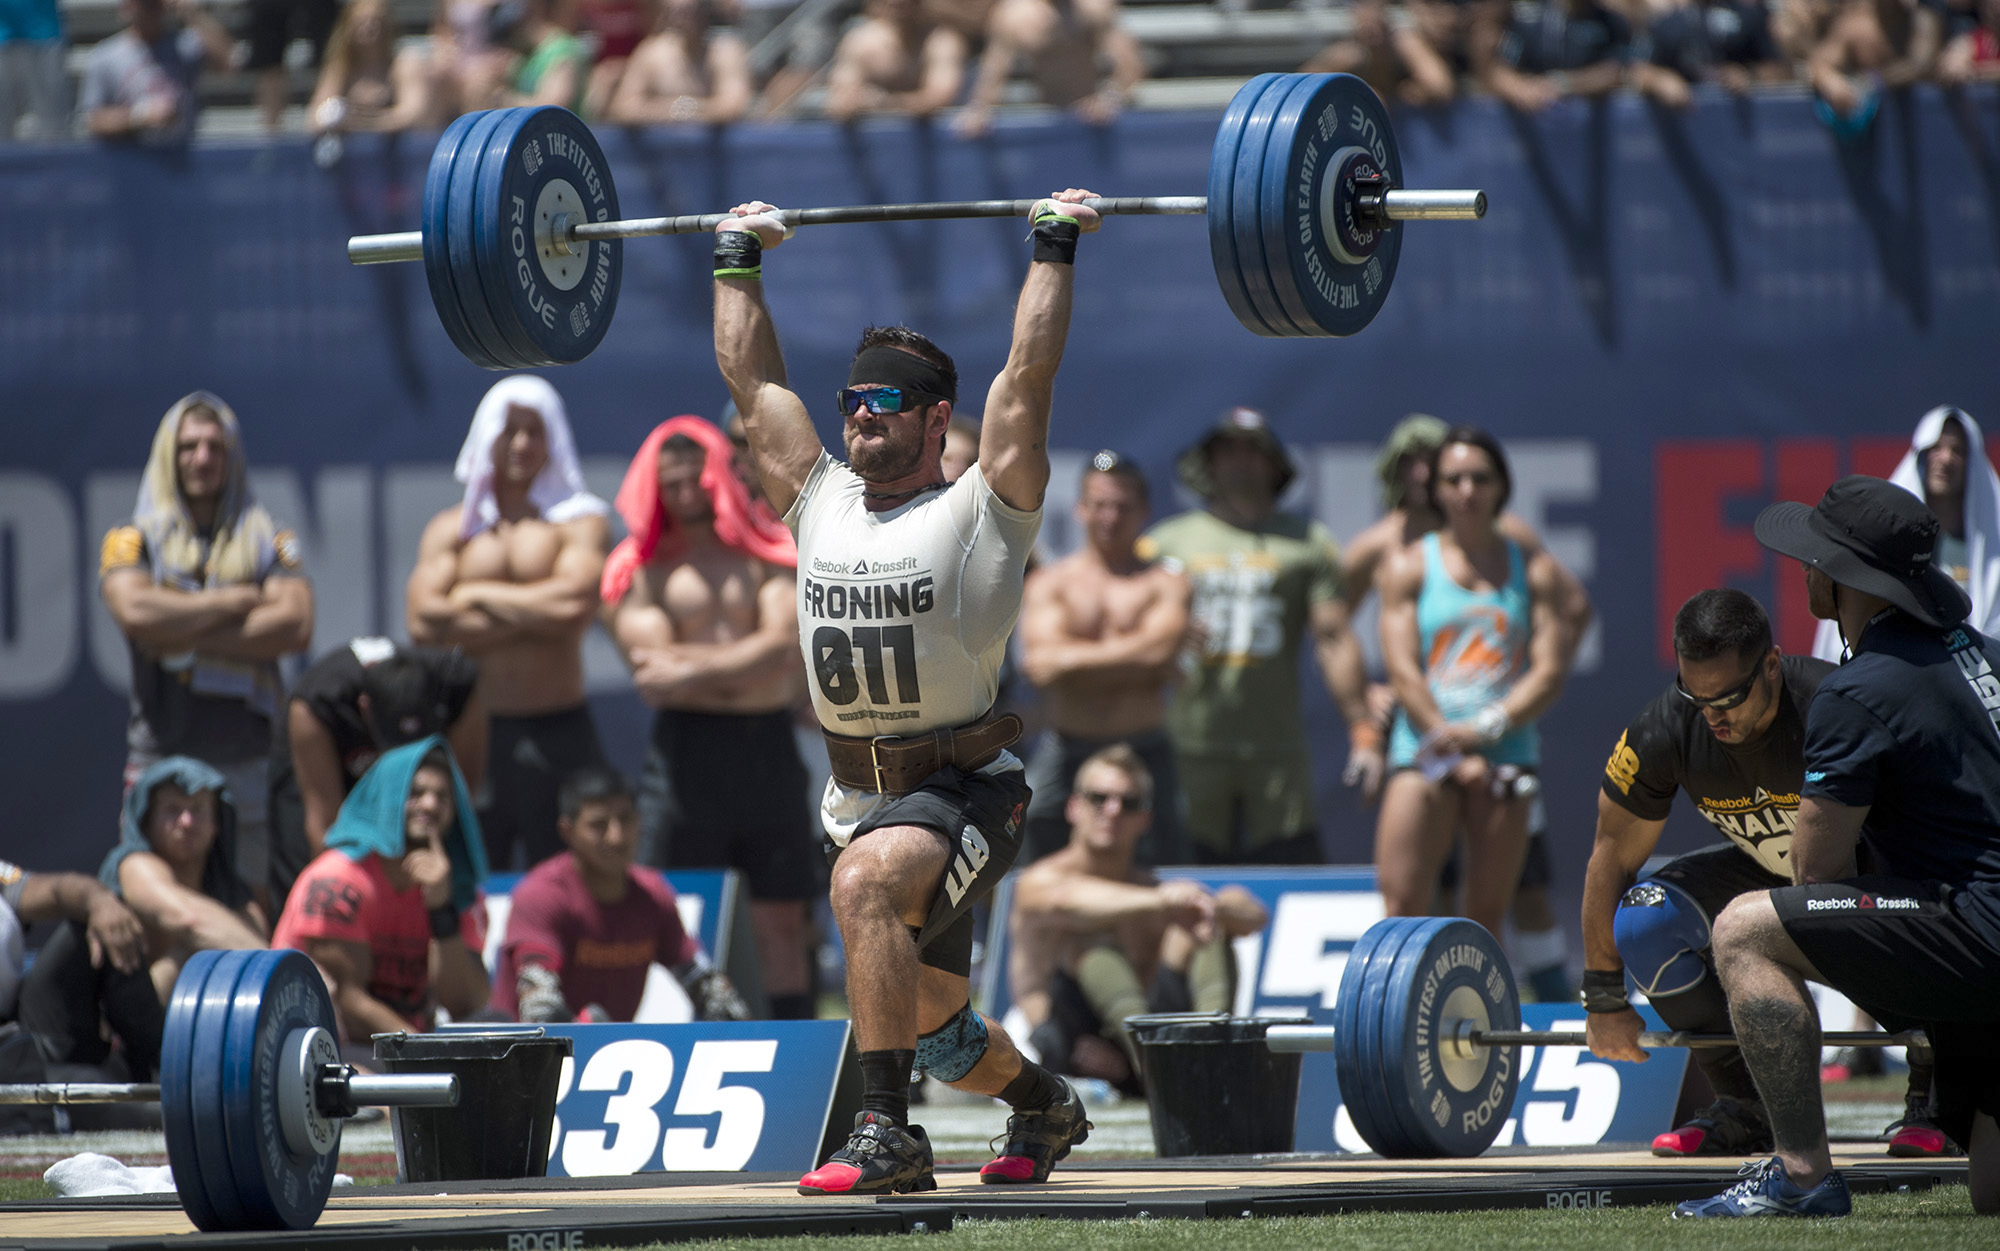 Rich Froning 2013 CrossFit Games